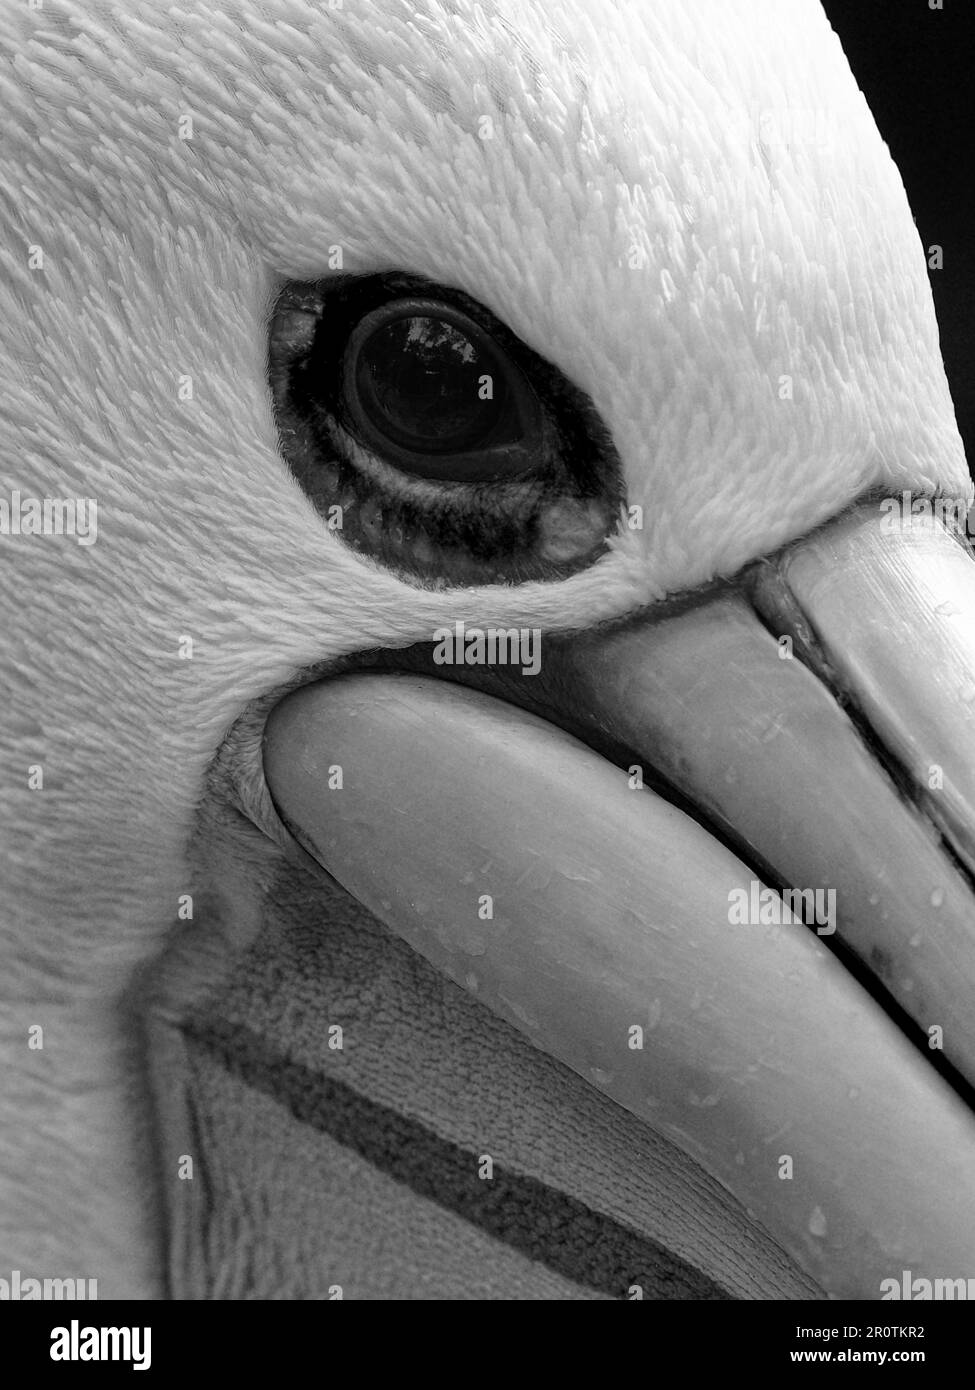 A closeup black and white image of an Australian Pelican's piercing eye and distinctive features. Stock Photo